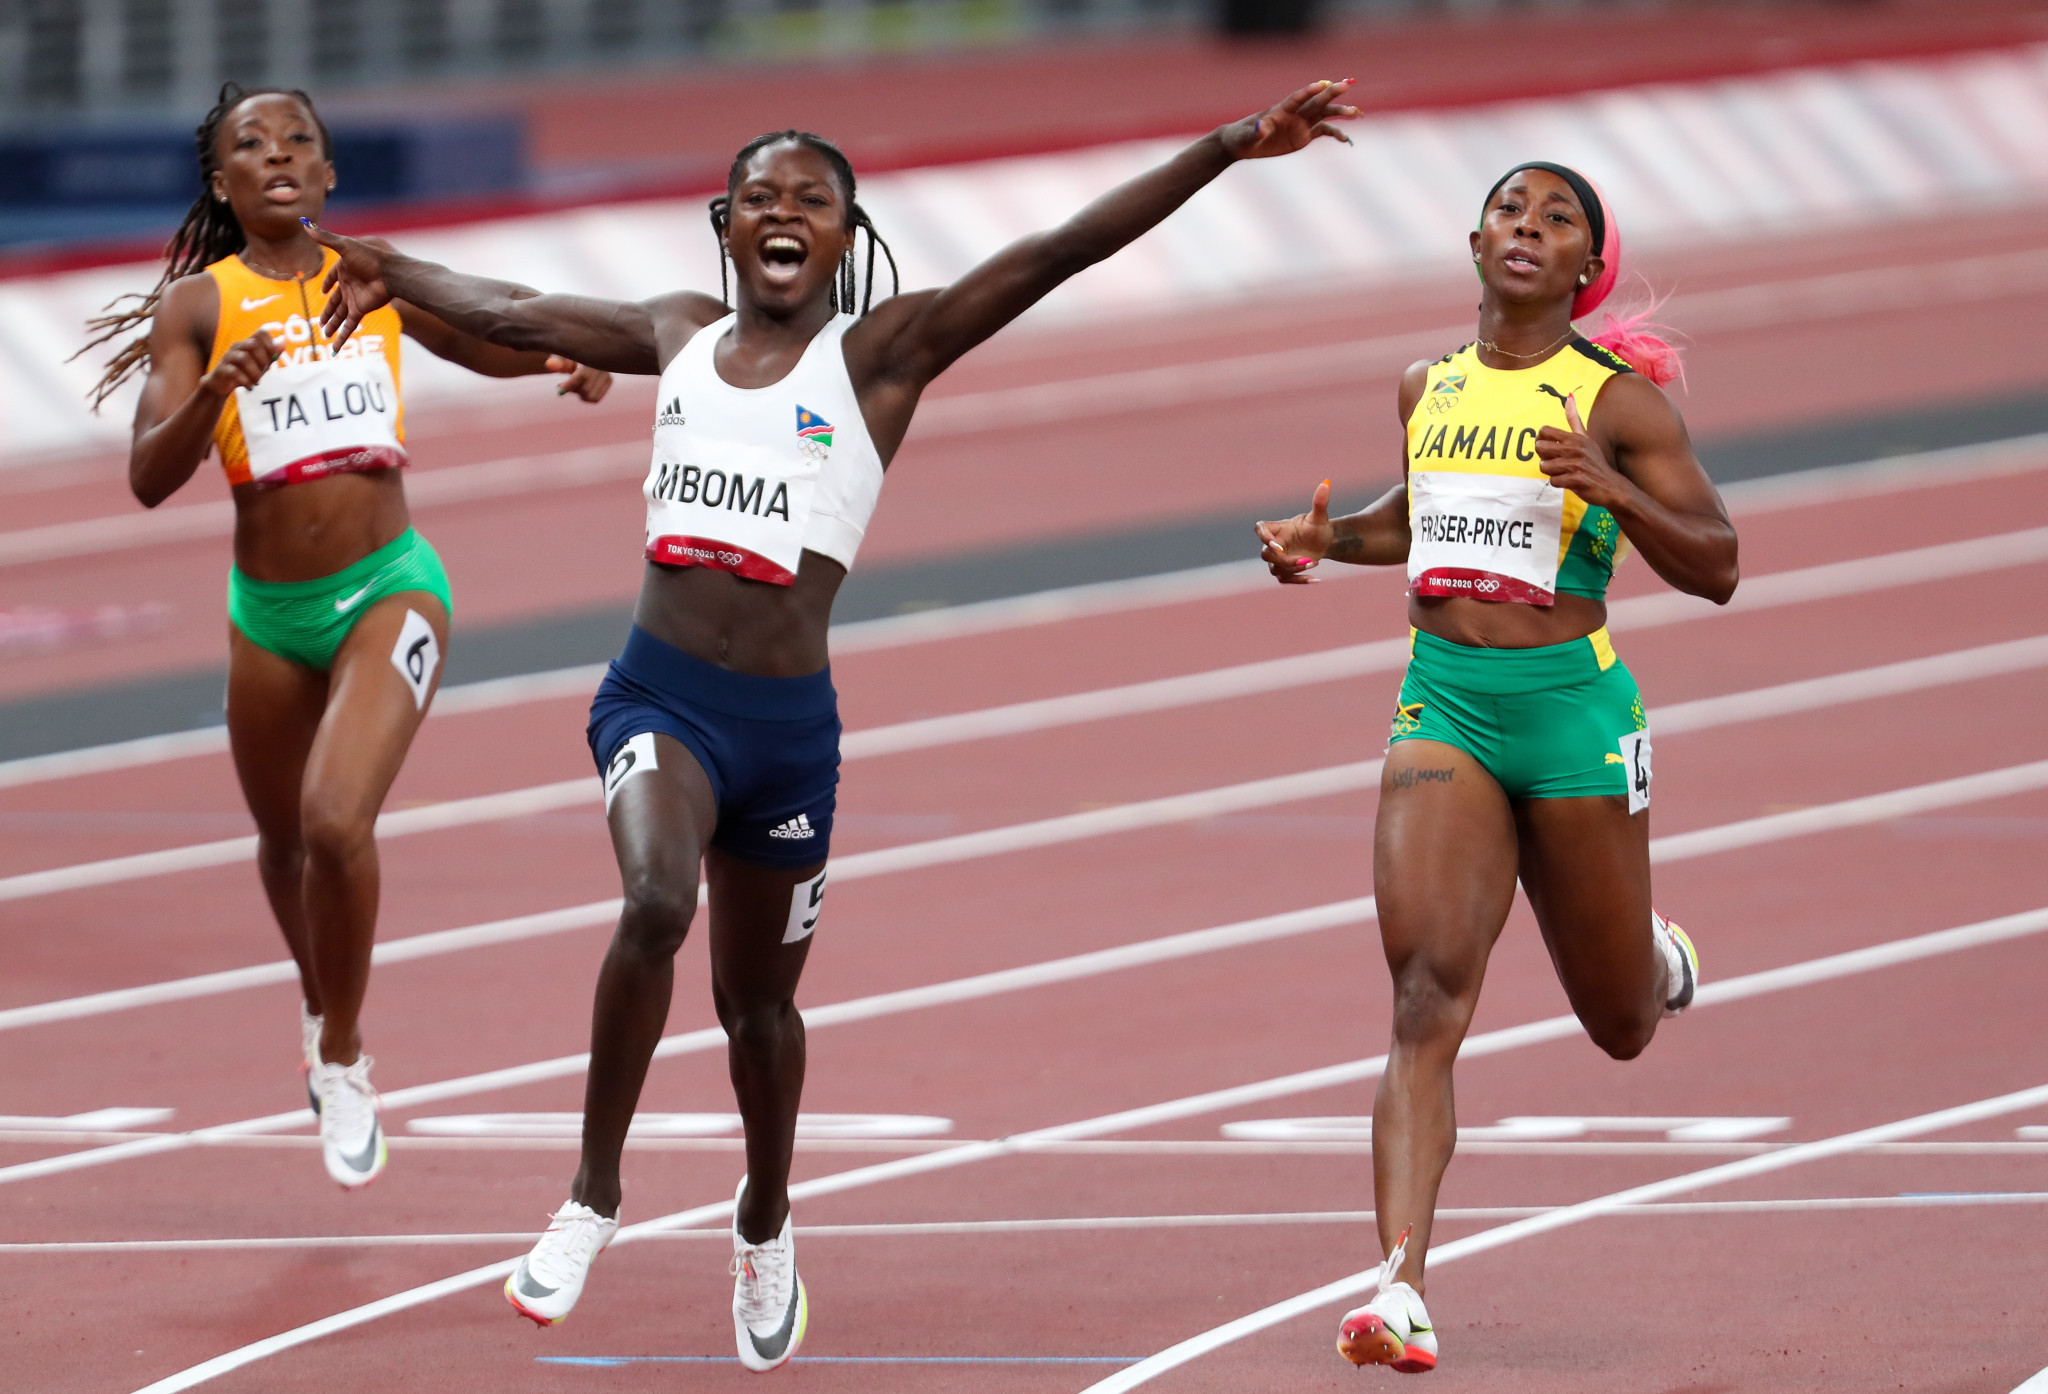 Christine Mboma, centre, won silver in the women's 200m at Tokyo 2020, but admitted her and Beatrice Masilingi's bans from the 400m were 